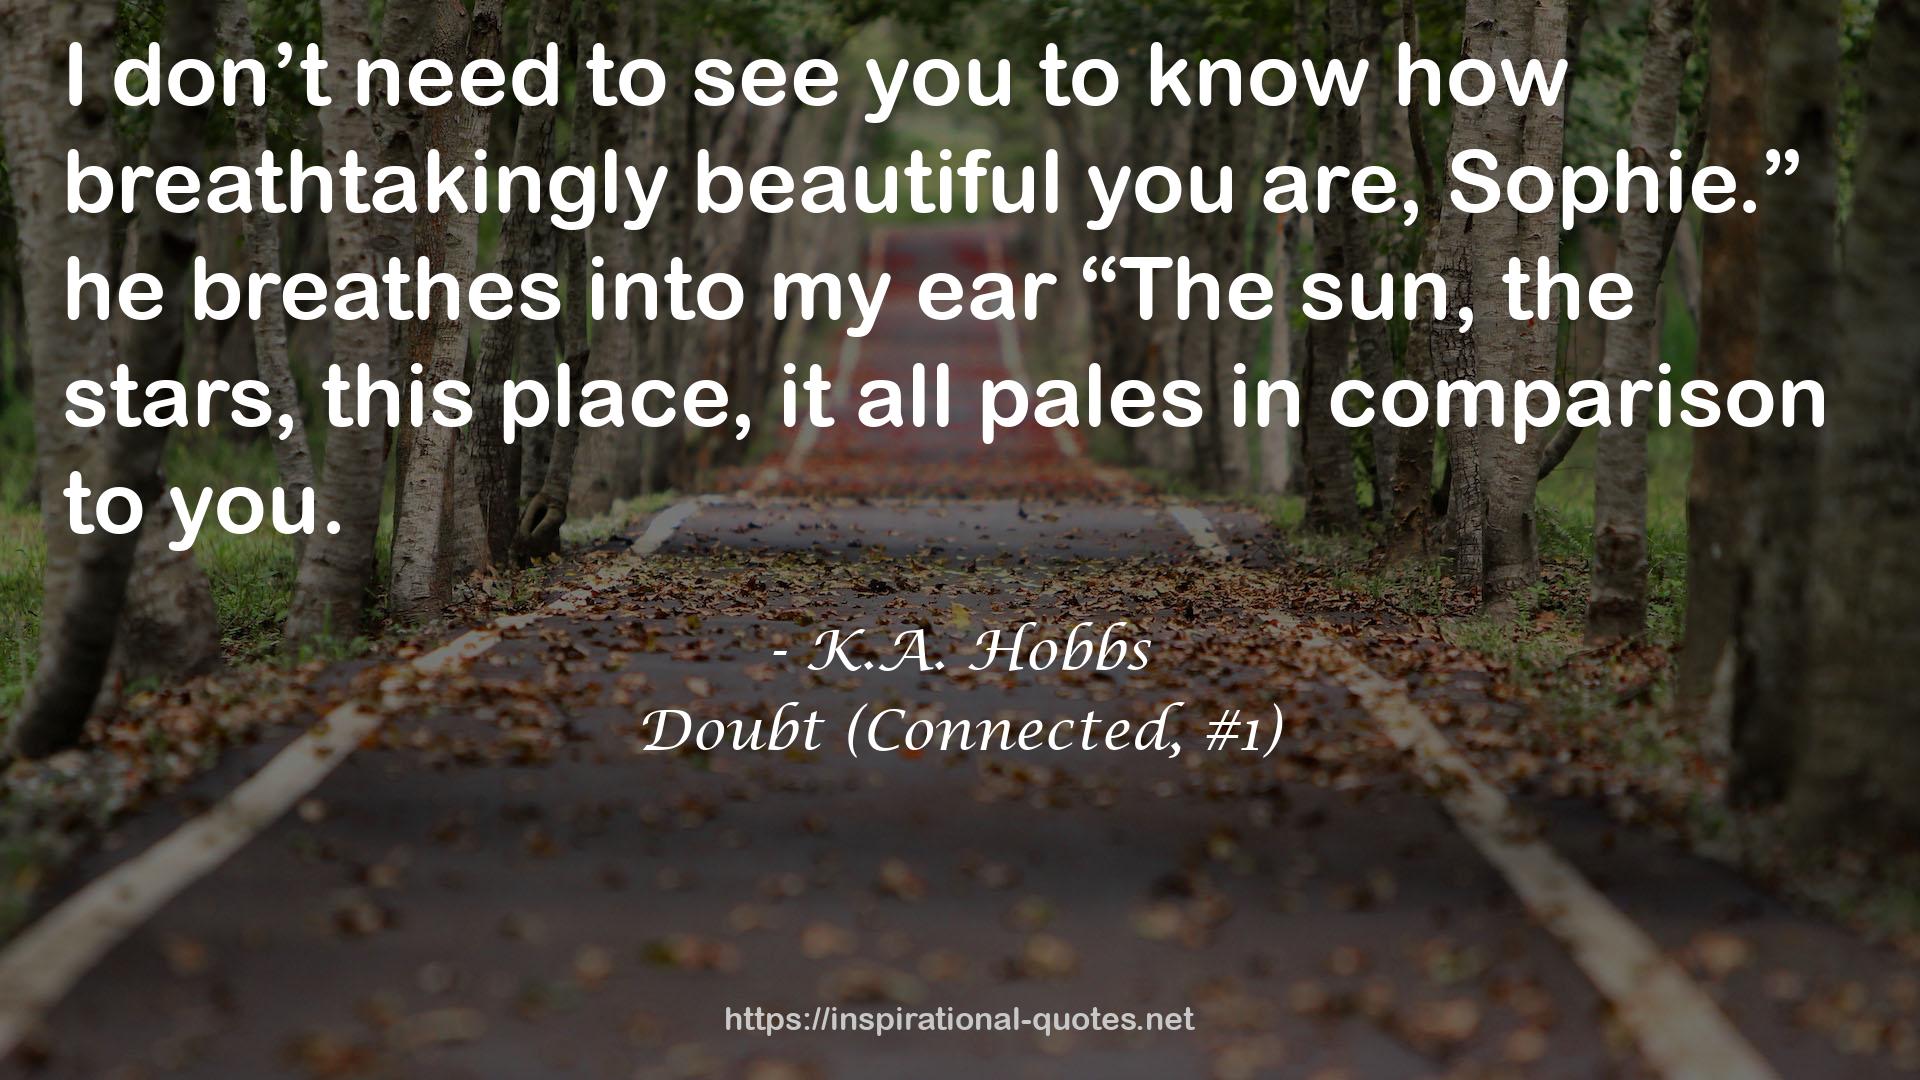 K.A. Hobbs QUOTES